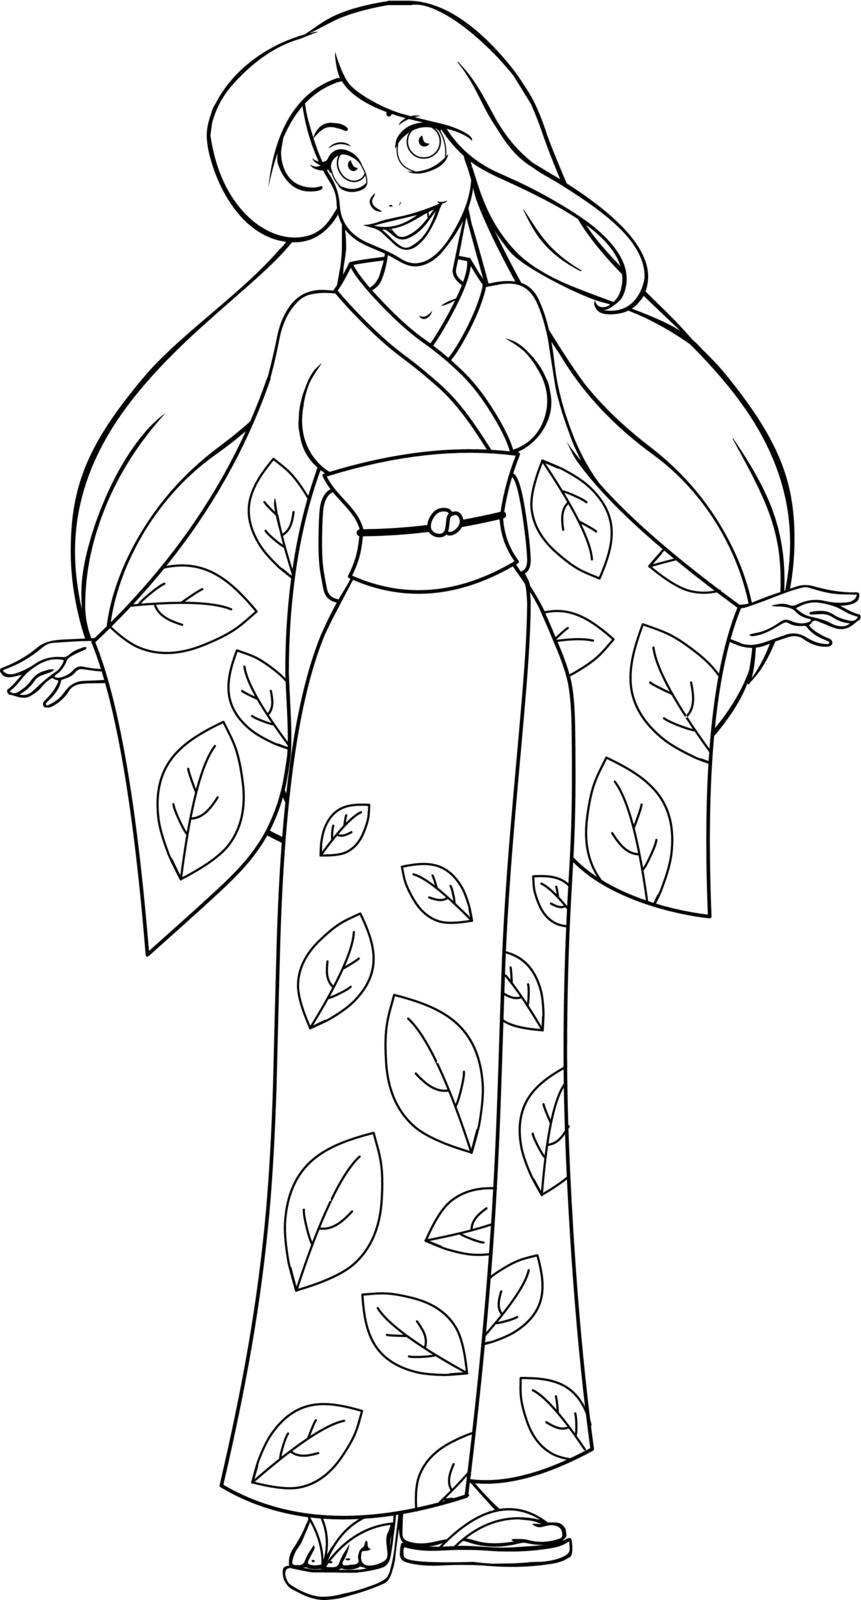 Vector illustration coloring page of a caucasian woman in traditional japanese kimono.
